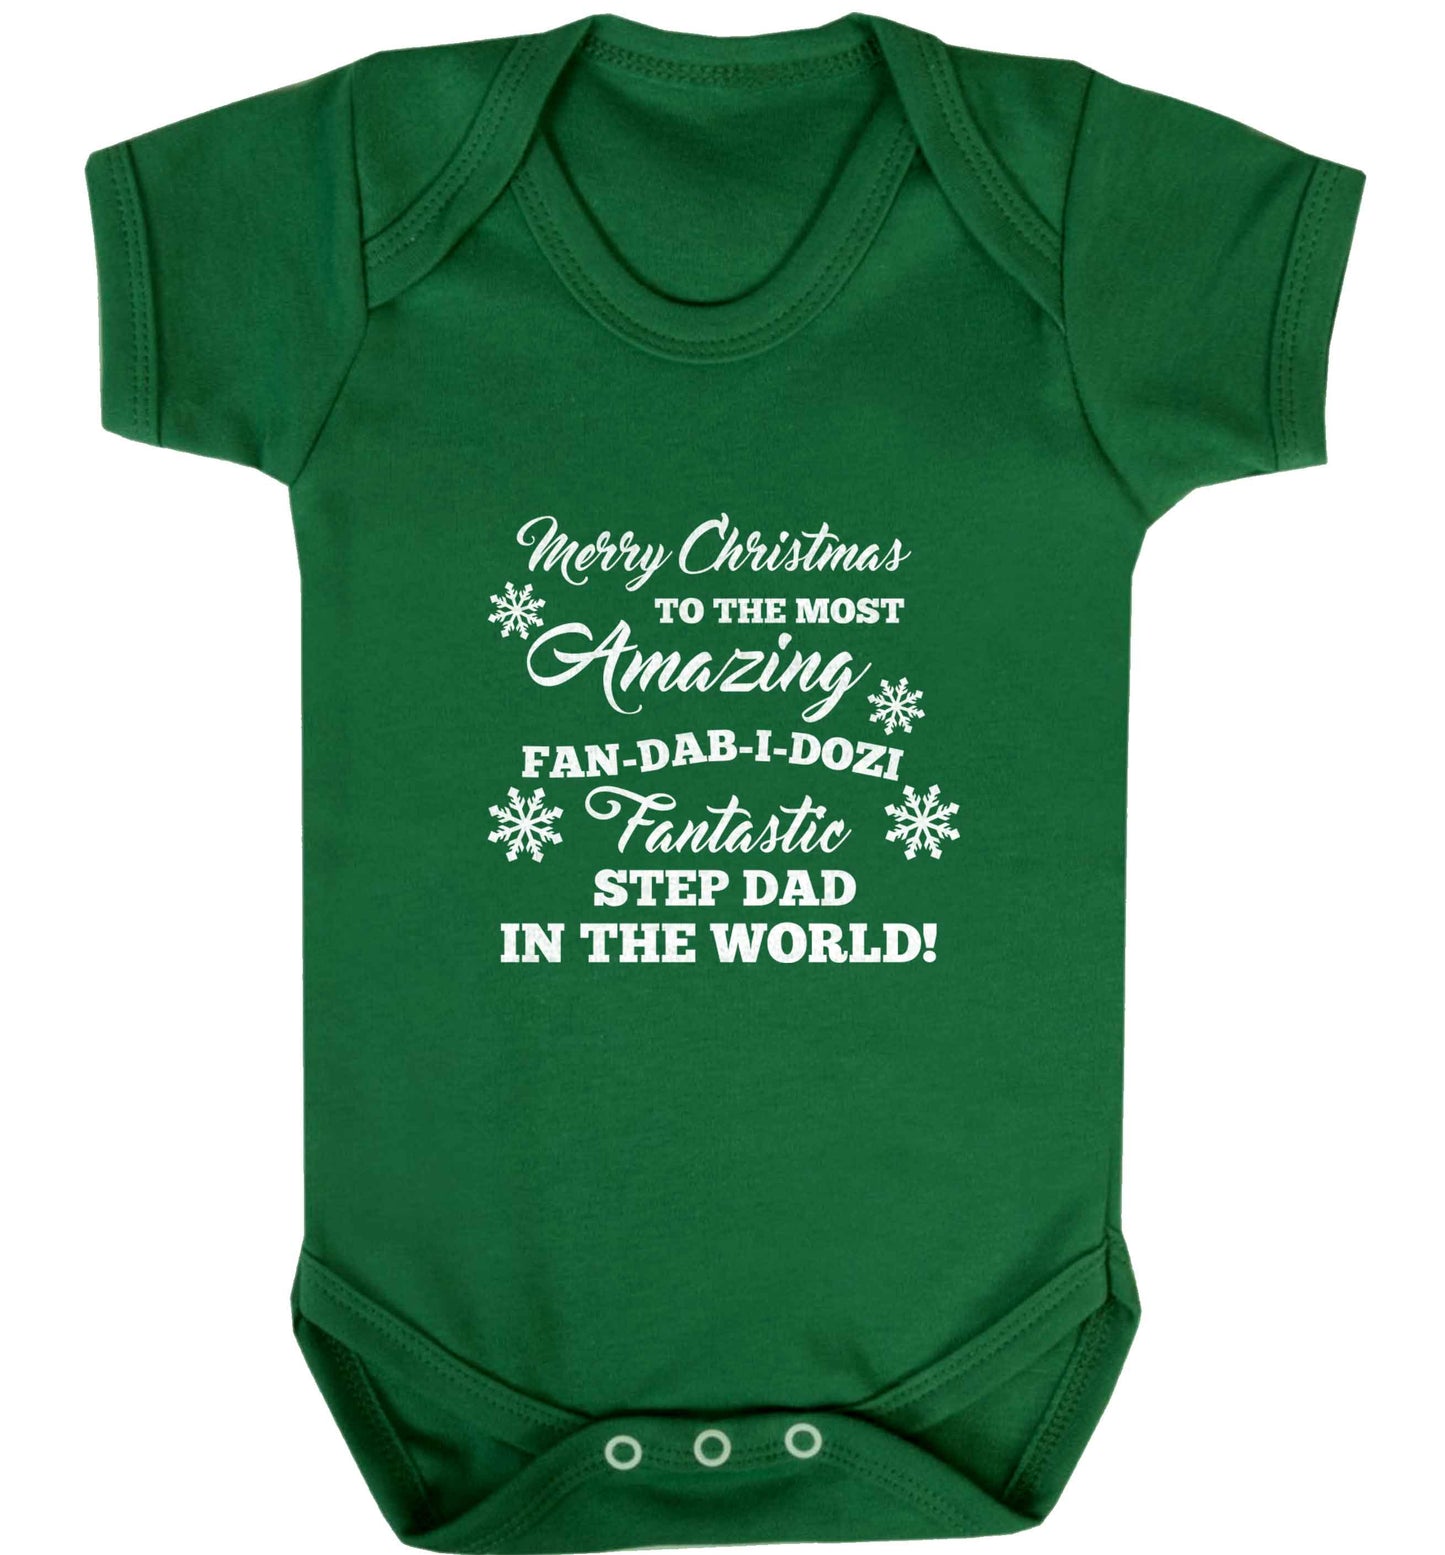 Merry Christmas to the most amazing fan-dab-i-dozi fantasic Step Dad in the world baby vest green 18-24 months